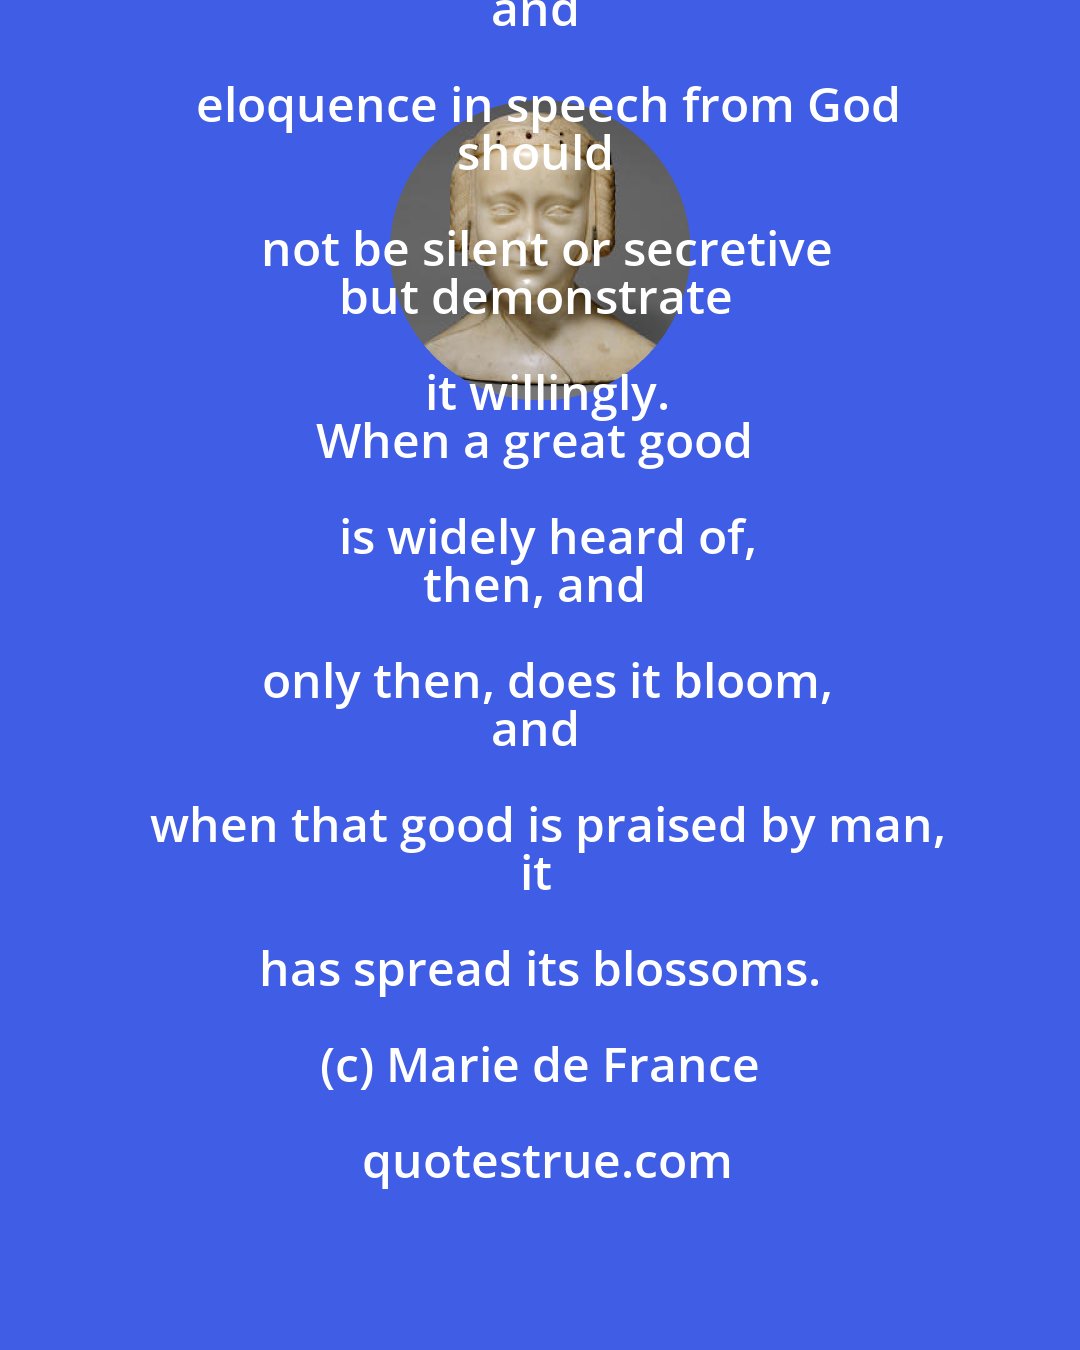 Marie de France: Whoever has received knowledge
and eloquence in speech from God
should not be silent or secretive
but demonstrate it willingly.
When a great good is widely heard of,
then, and only then, does it bloom,
and when that good is praised by man,
it has spread its blossoms.